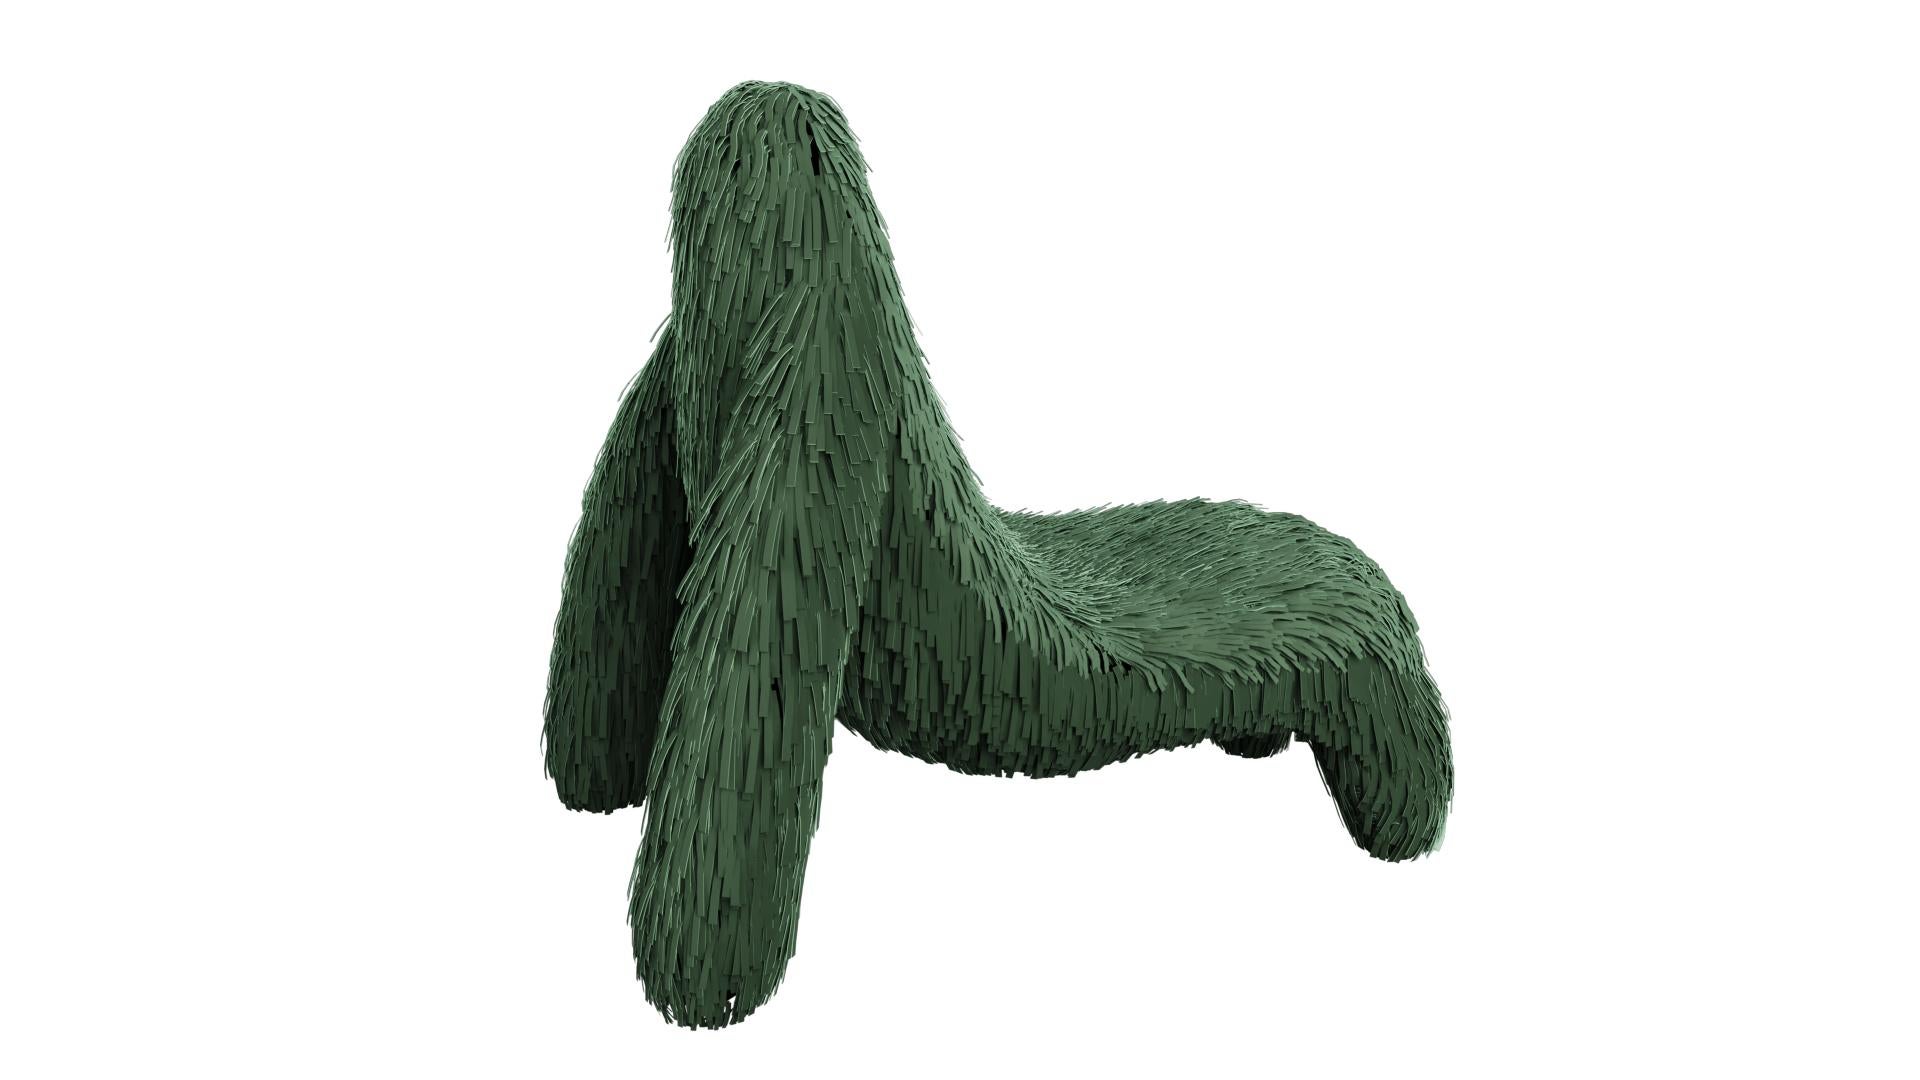 Gorilla chair with real green leather by Marcantonio is an ape shaped seat with a rich green leather covering. A lounge chair with a fantastic, unique shape.

For his debut creations, Marcantonio introduced “Vegetal Animal”, a concept that evokes